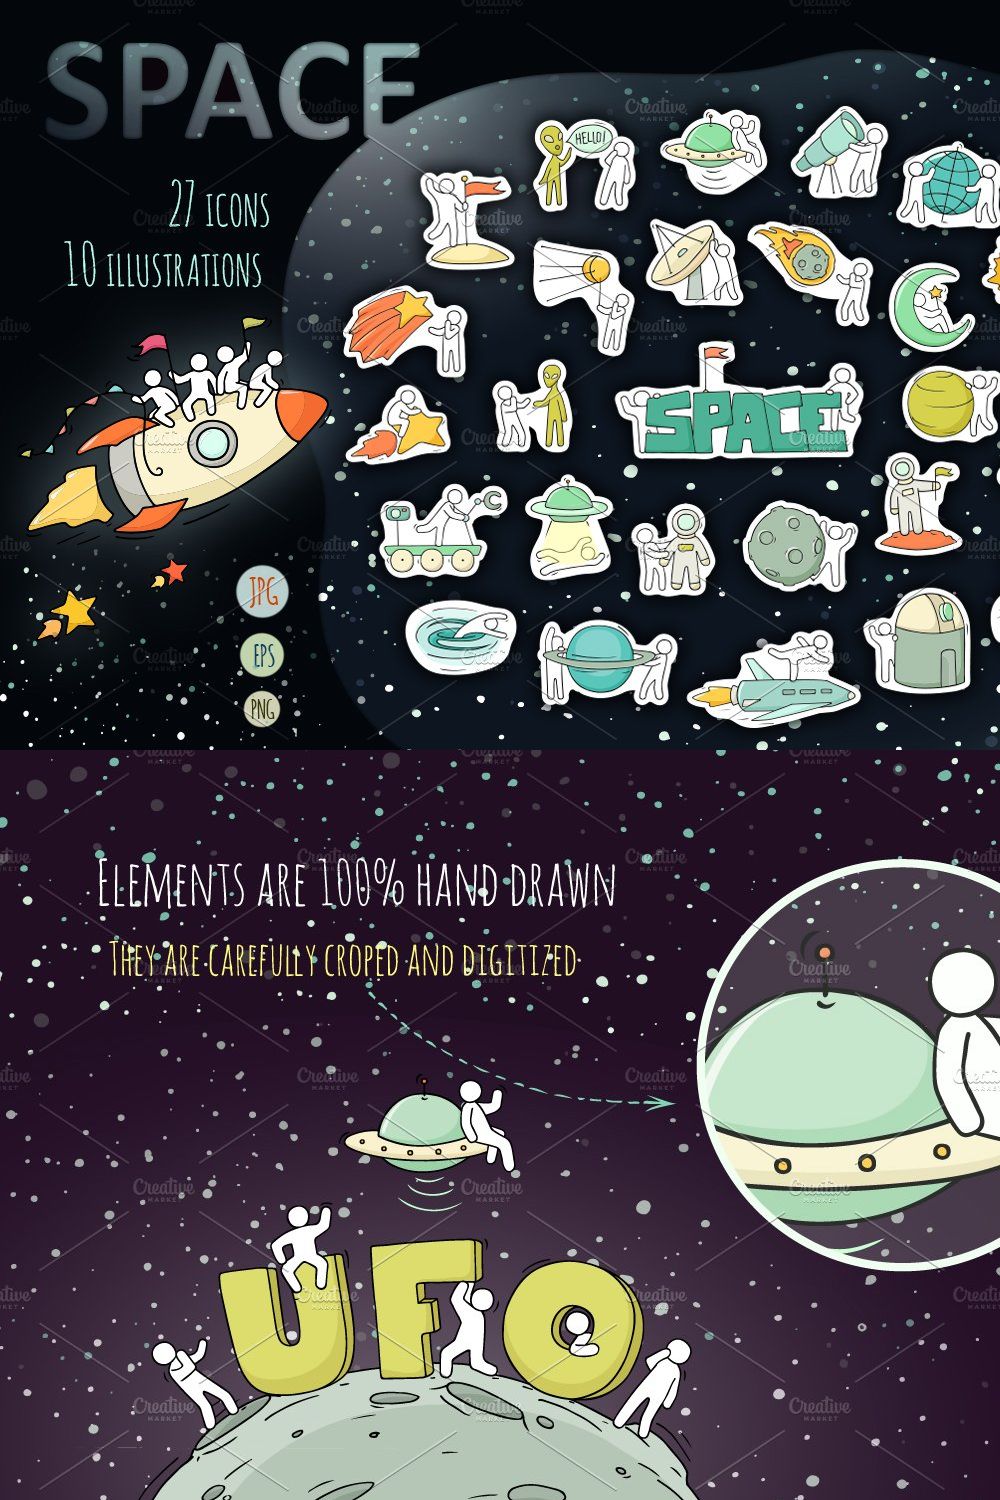 Space objects with little People pinterest preview image.